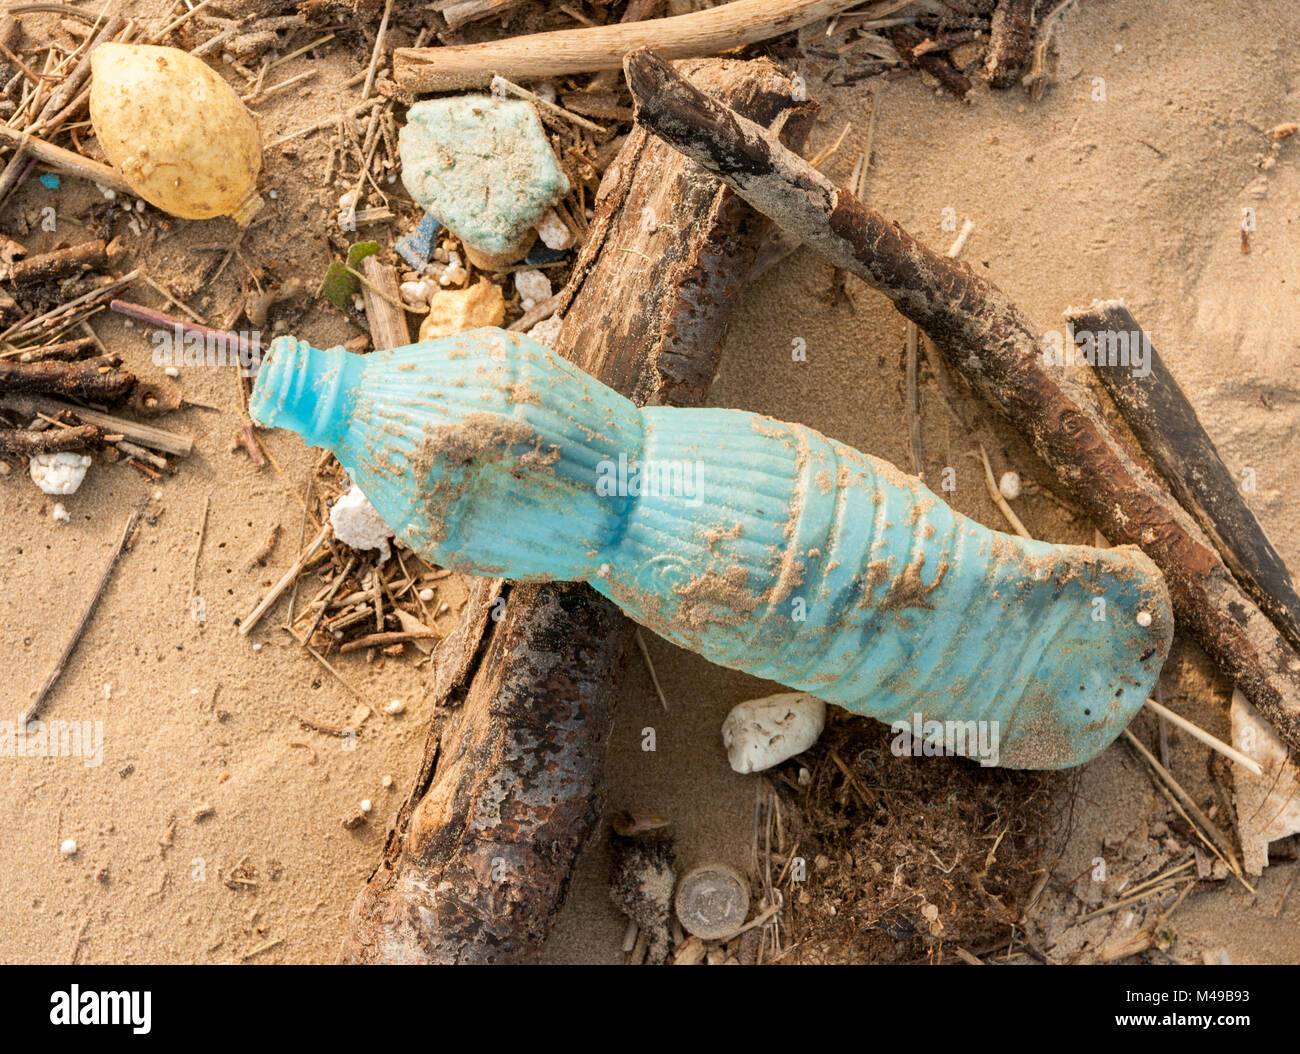 Detritus including a veriety of plastics washed up on Cefn Sidan, Pembrey. West Wales. UK. Stock Photo